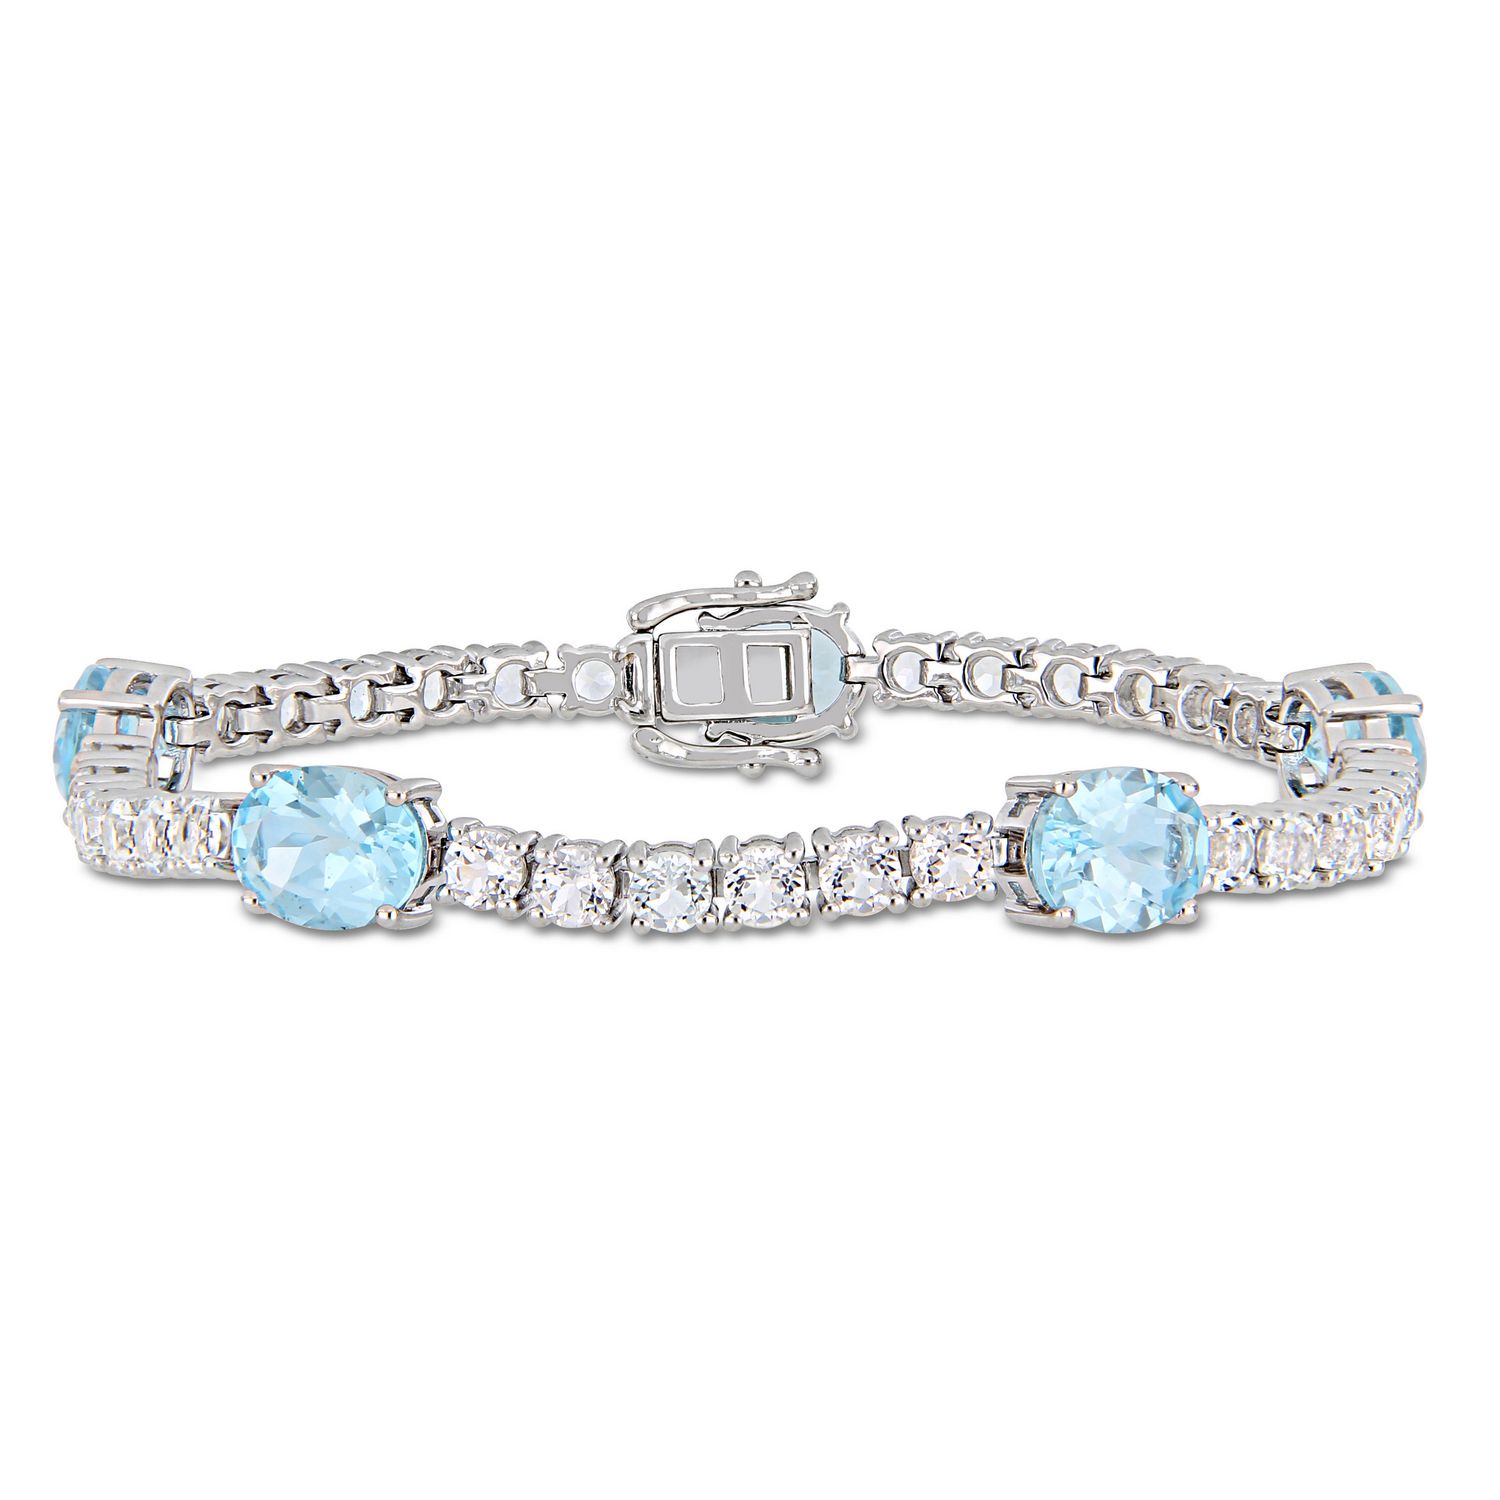 Tangelo 28 Carat T.G.W. Blue Topaz and White Topaz Sterling Silver Oval ...